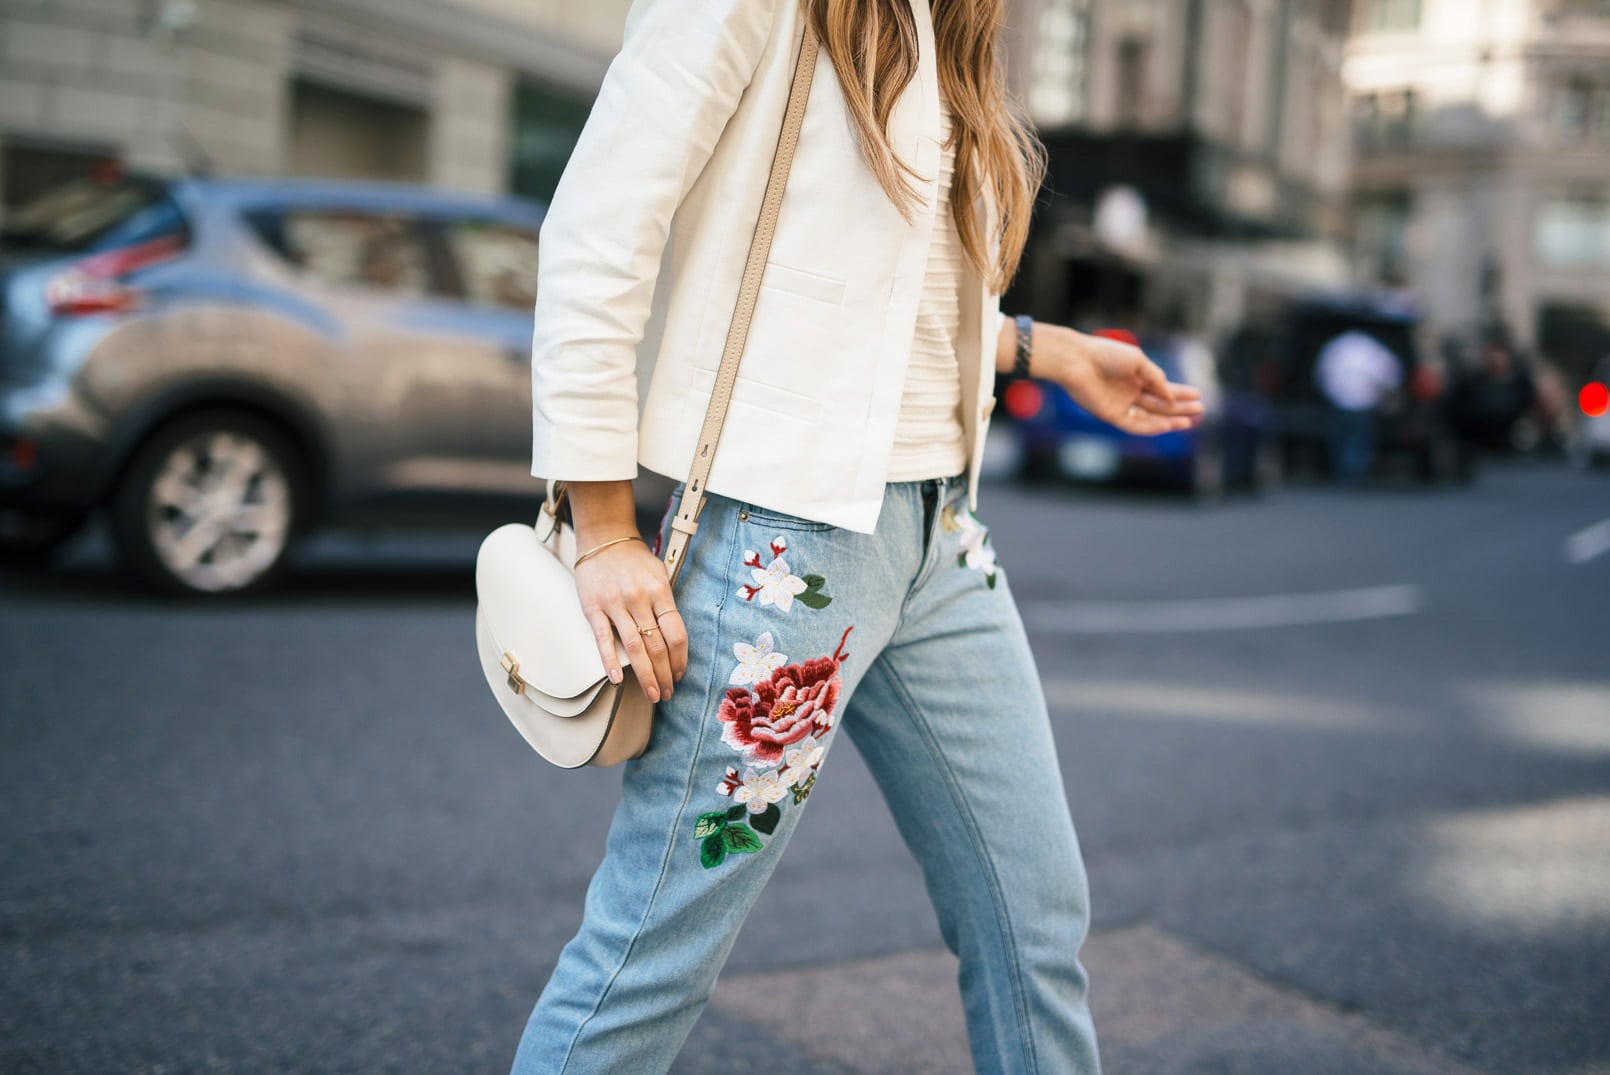 Embroidered Jeans | The Girl From Panama- Ribbed Sleeveless Sweater, Ann Taylor Linen Jacket, Braided Strappy Sandals, Chloe Georgia bag.